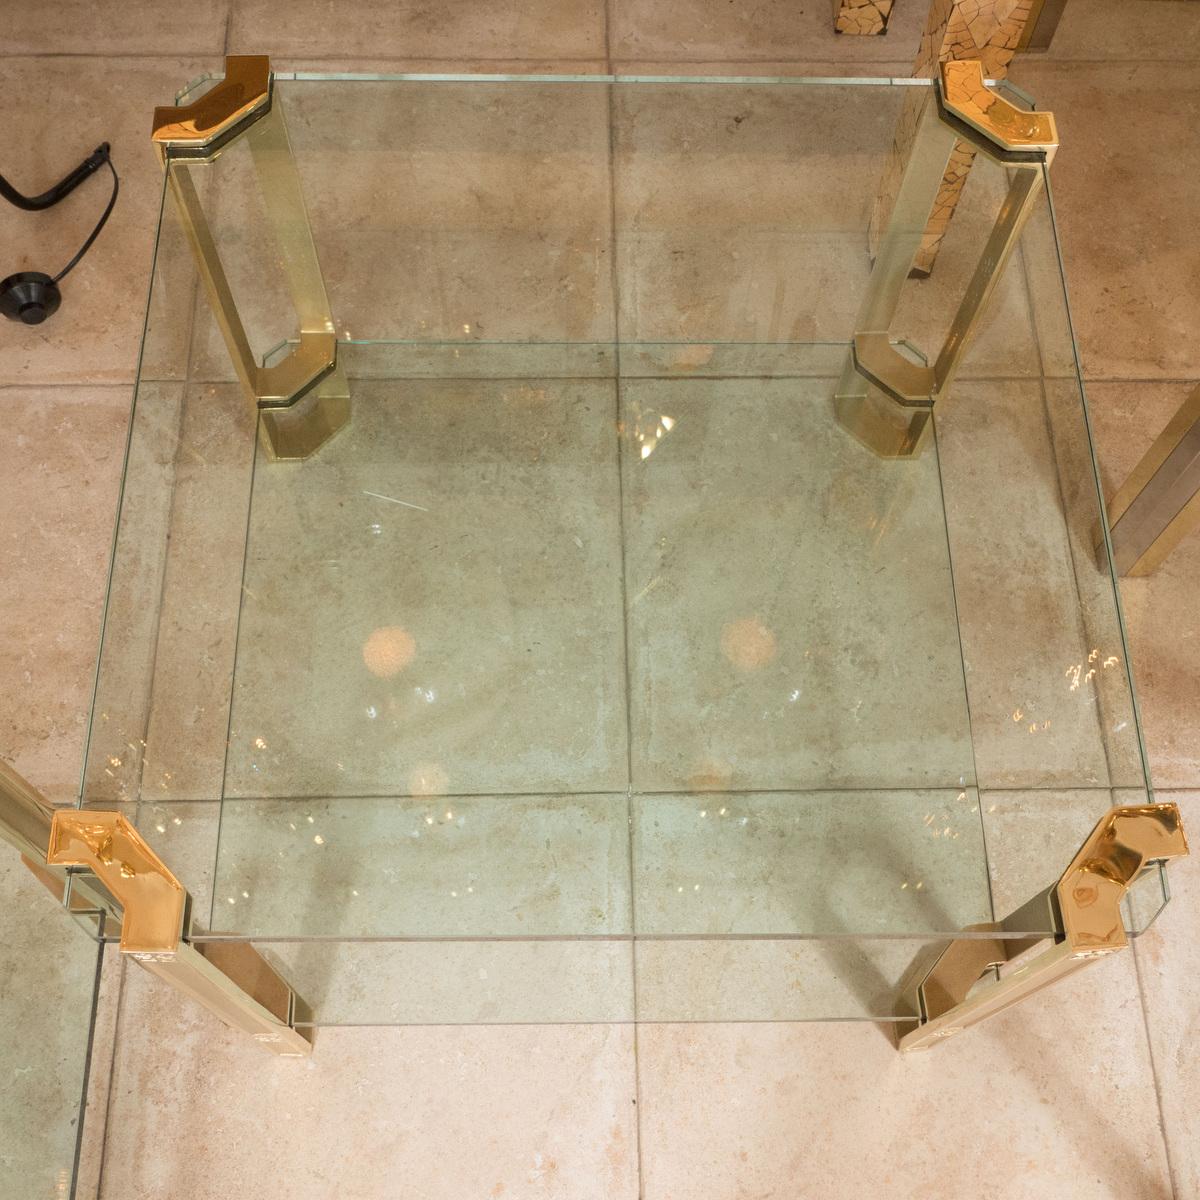 Pair of brass and glass square two tiered end tables with decorative details.

Dimensions: 24.5